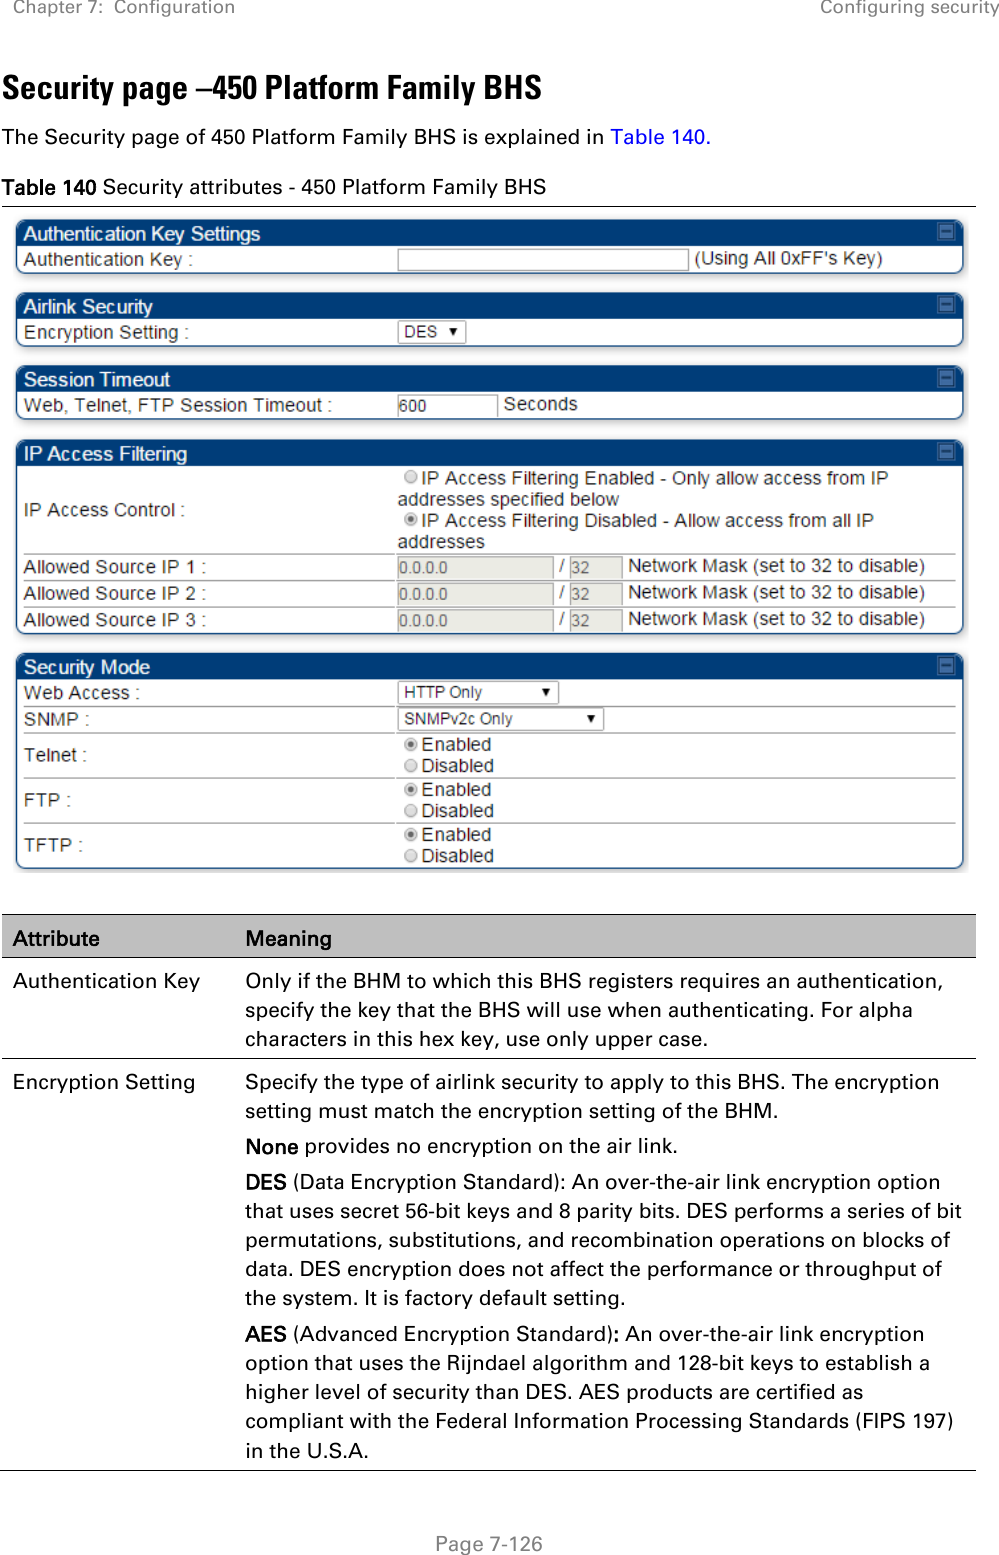 Chapter 7:  Configuration Configuring security   Page 7-126 Security page –450 Platform Family BHS The Security page of 450 Platform Family BHS is explained in Table 140. Table 140 Security attributes - 450 Platform Family BHS   Attribute Meaning Authentication Key Only if the BHM to which this BHS registers requires an authentication, specify the key that the BHS will use when authenticating. For alpha characters in this hex key, use only upper case. Encryption Setting Specify the type of airlink security to apply to this BHS. The encryption setting must match the encryption setting of the BHM. None provides no encryption on the air link.  DES (Data Encryption Standard): An over-the-air link encryption option that uses secret 56-bit keys and 8 parity bits. DES performs a series of bit permutations, substitutions, and recombination operations on blocks of data. DES encryption does not affect the performance or throughput of the system. It is factory default setting. AES (Advanced Encryption Standard): An over-the-air link encryption option that uses the Rijndael algorithm and 128-bit keys to establish a higher level of security than DES. AES products are certified as compliant with the Federal Information Processing Standards (FIPS 197) in the U.S.A. 